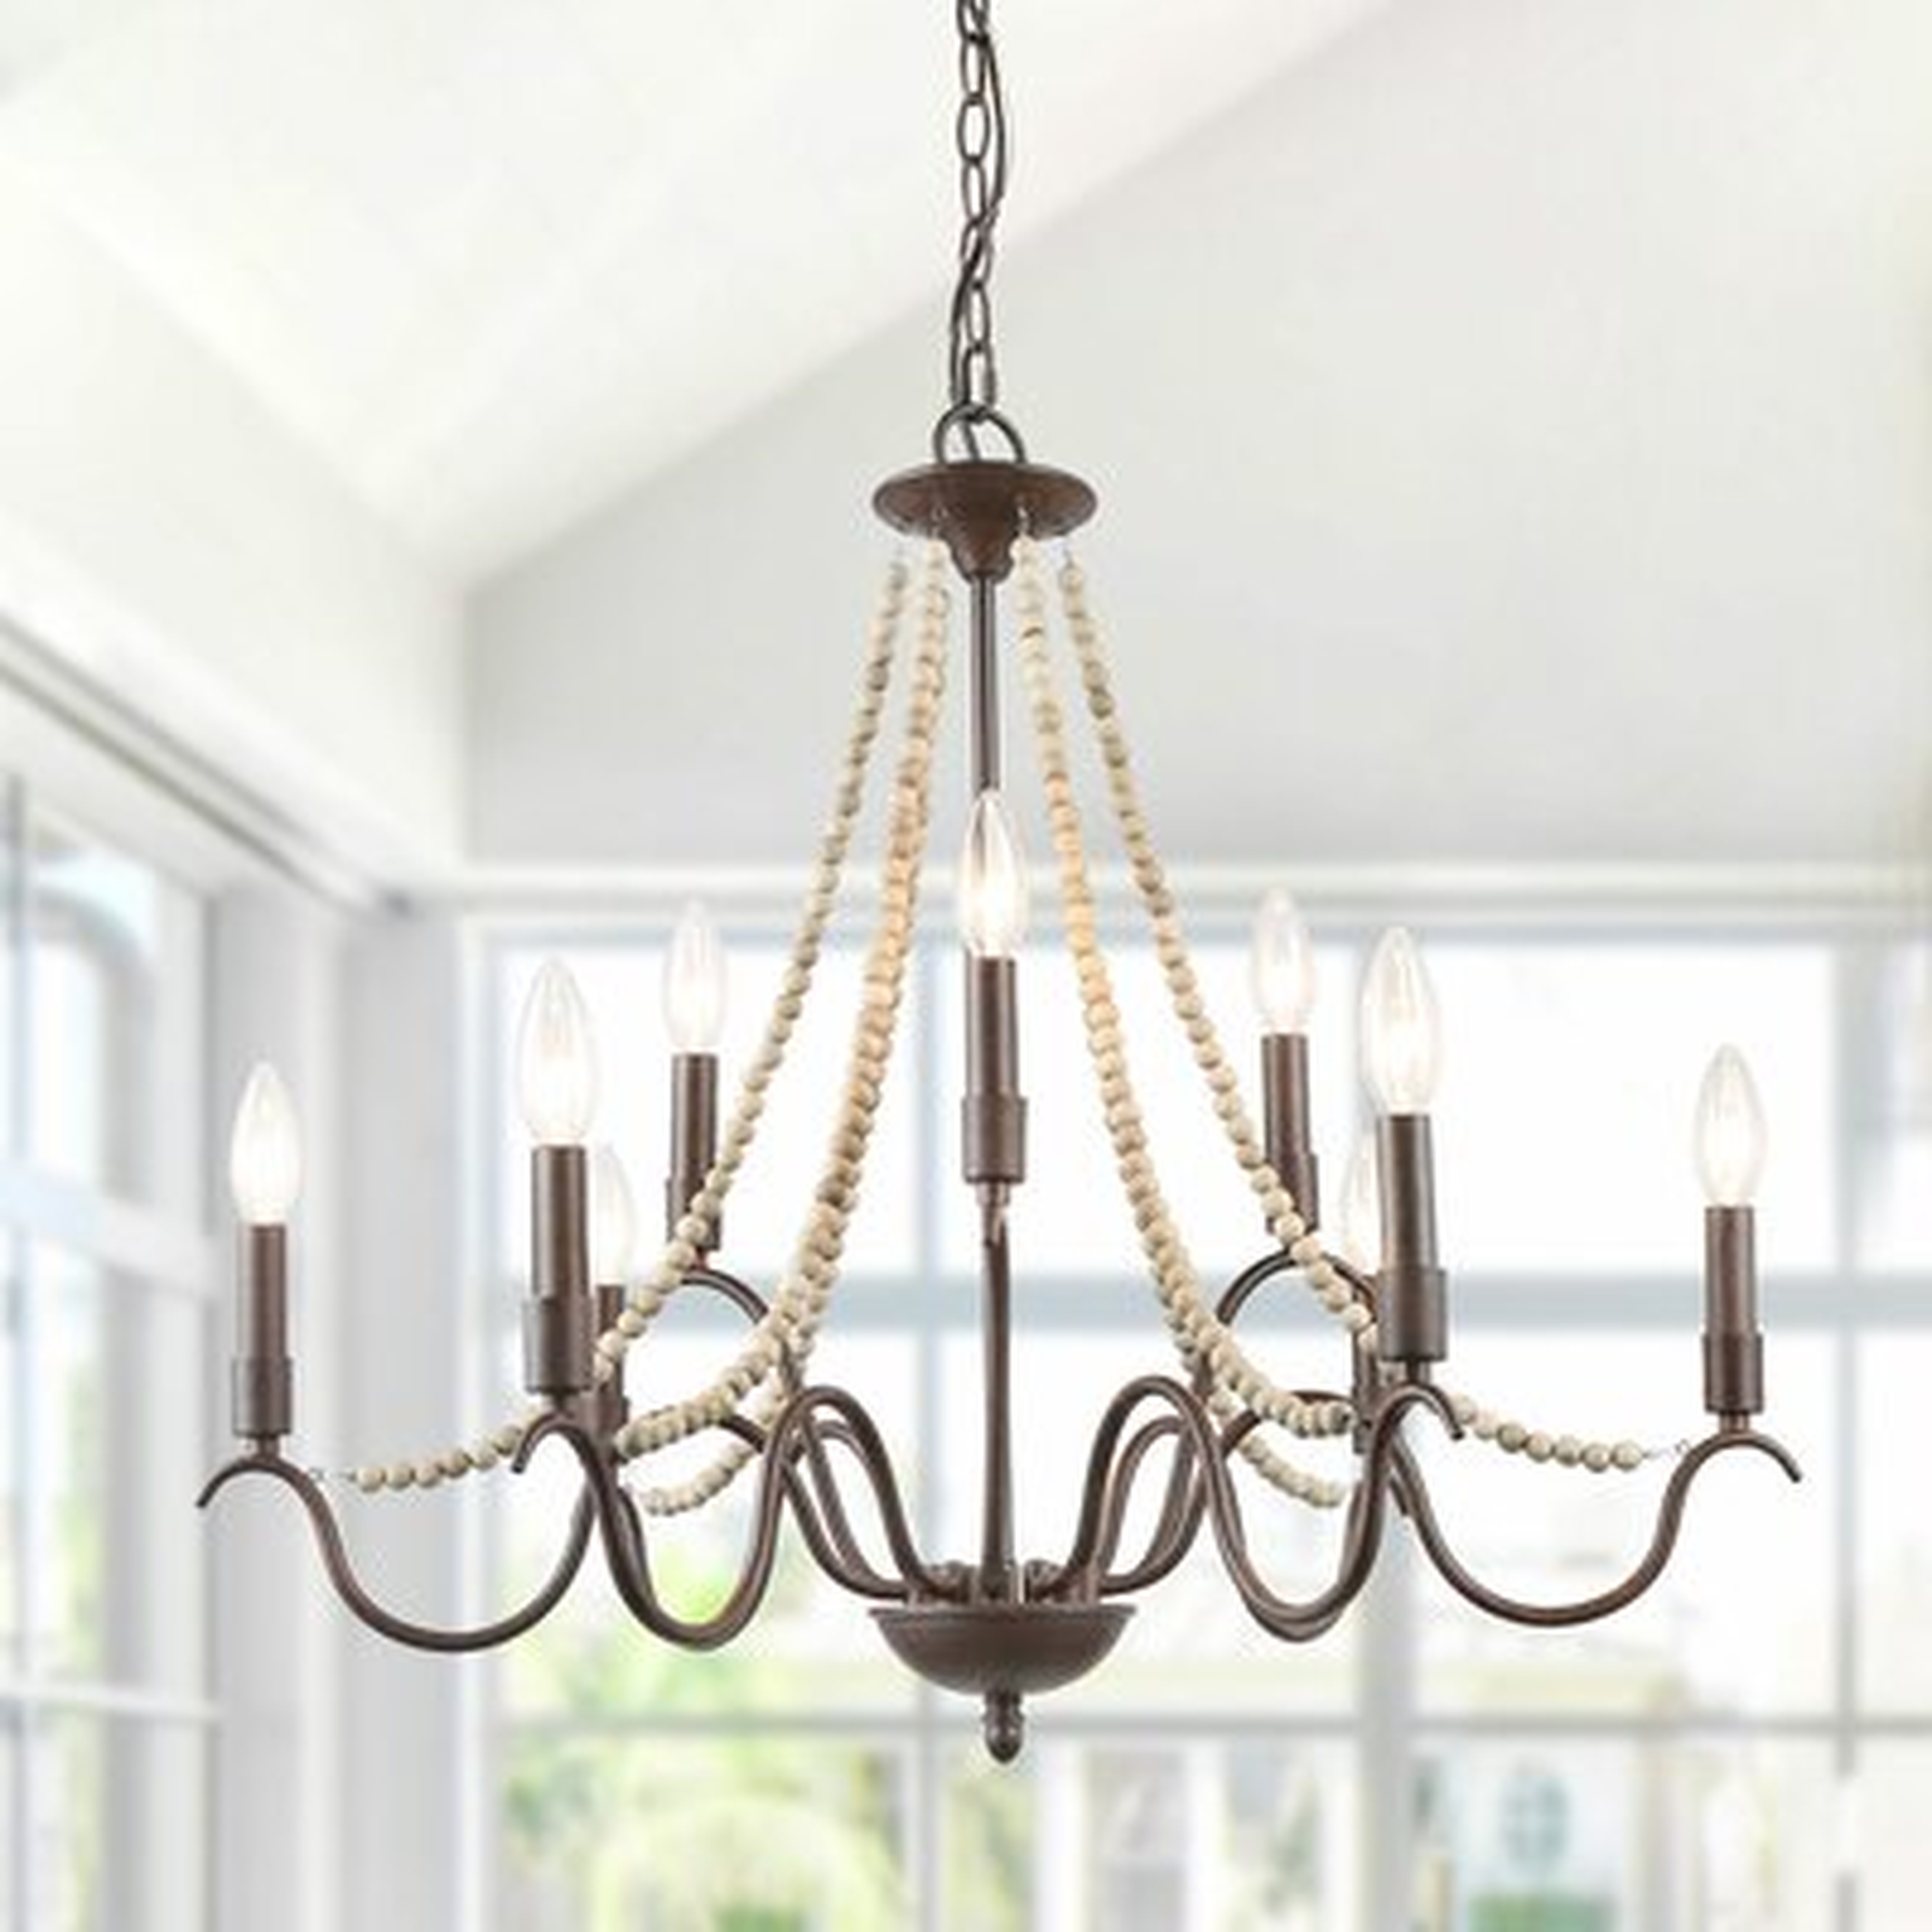 Madero 9 - Light Candle Style Empire Chandelier - Wayfair